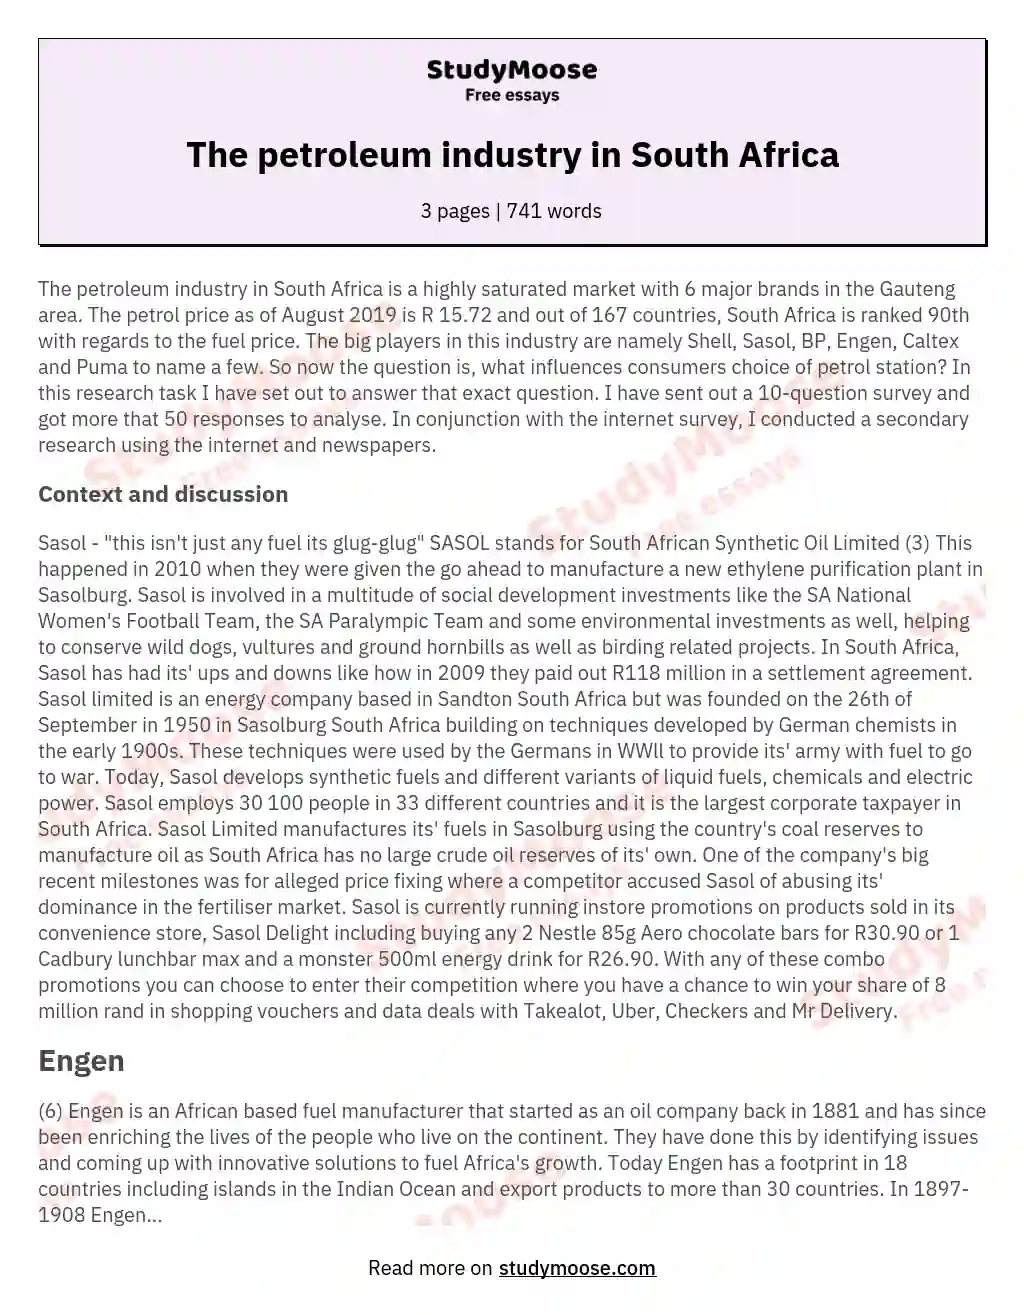 The petroleum industry in South Africa essay